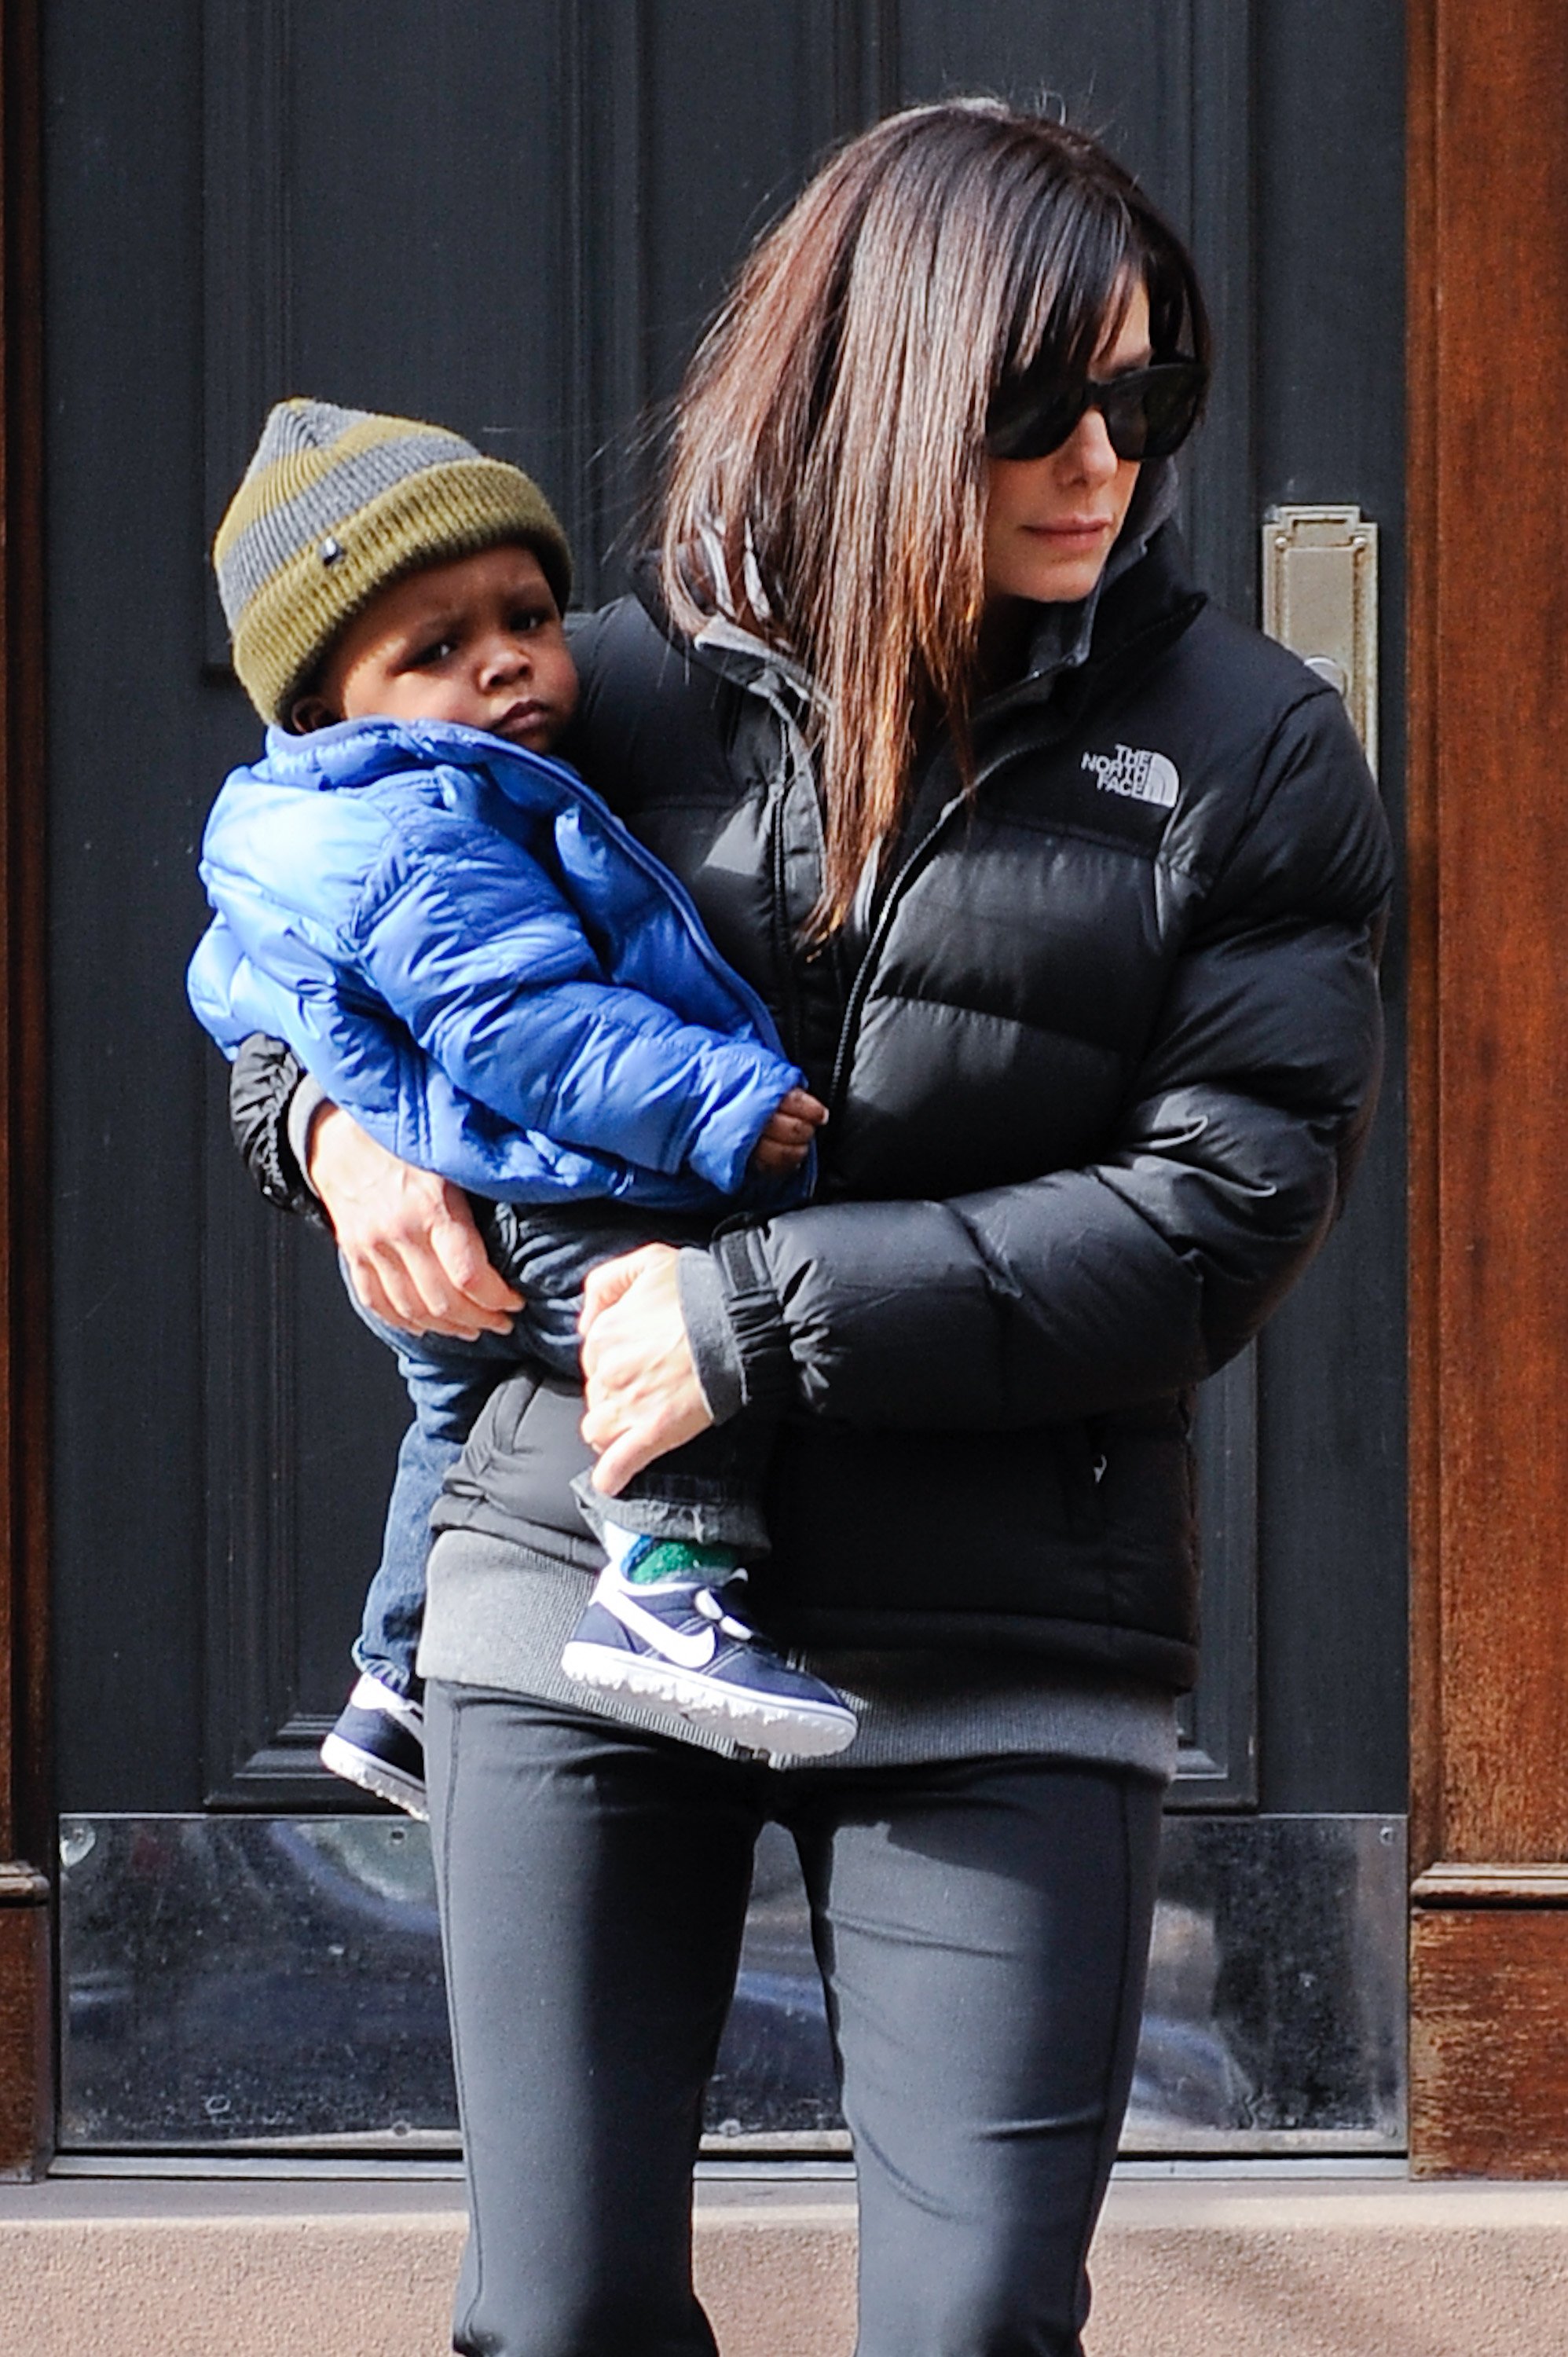 Sandra Bullock with her son in New York 2011. | Source: Getty Images